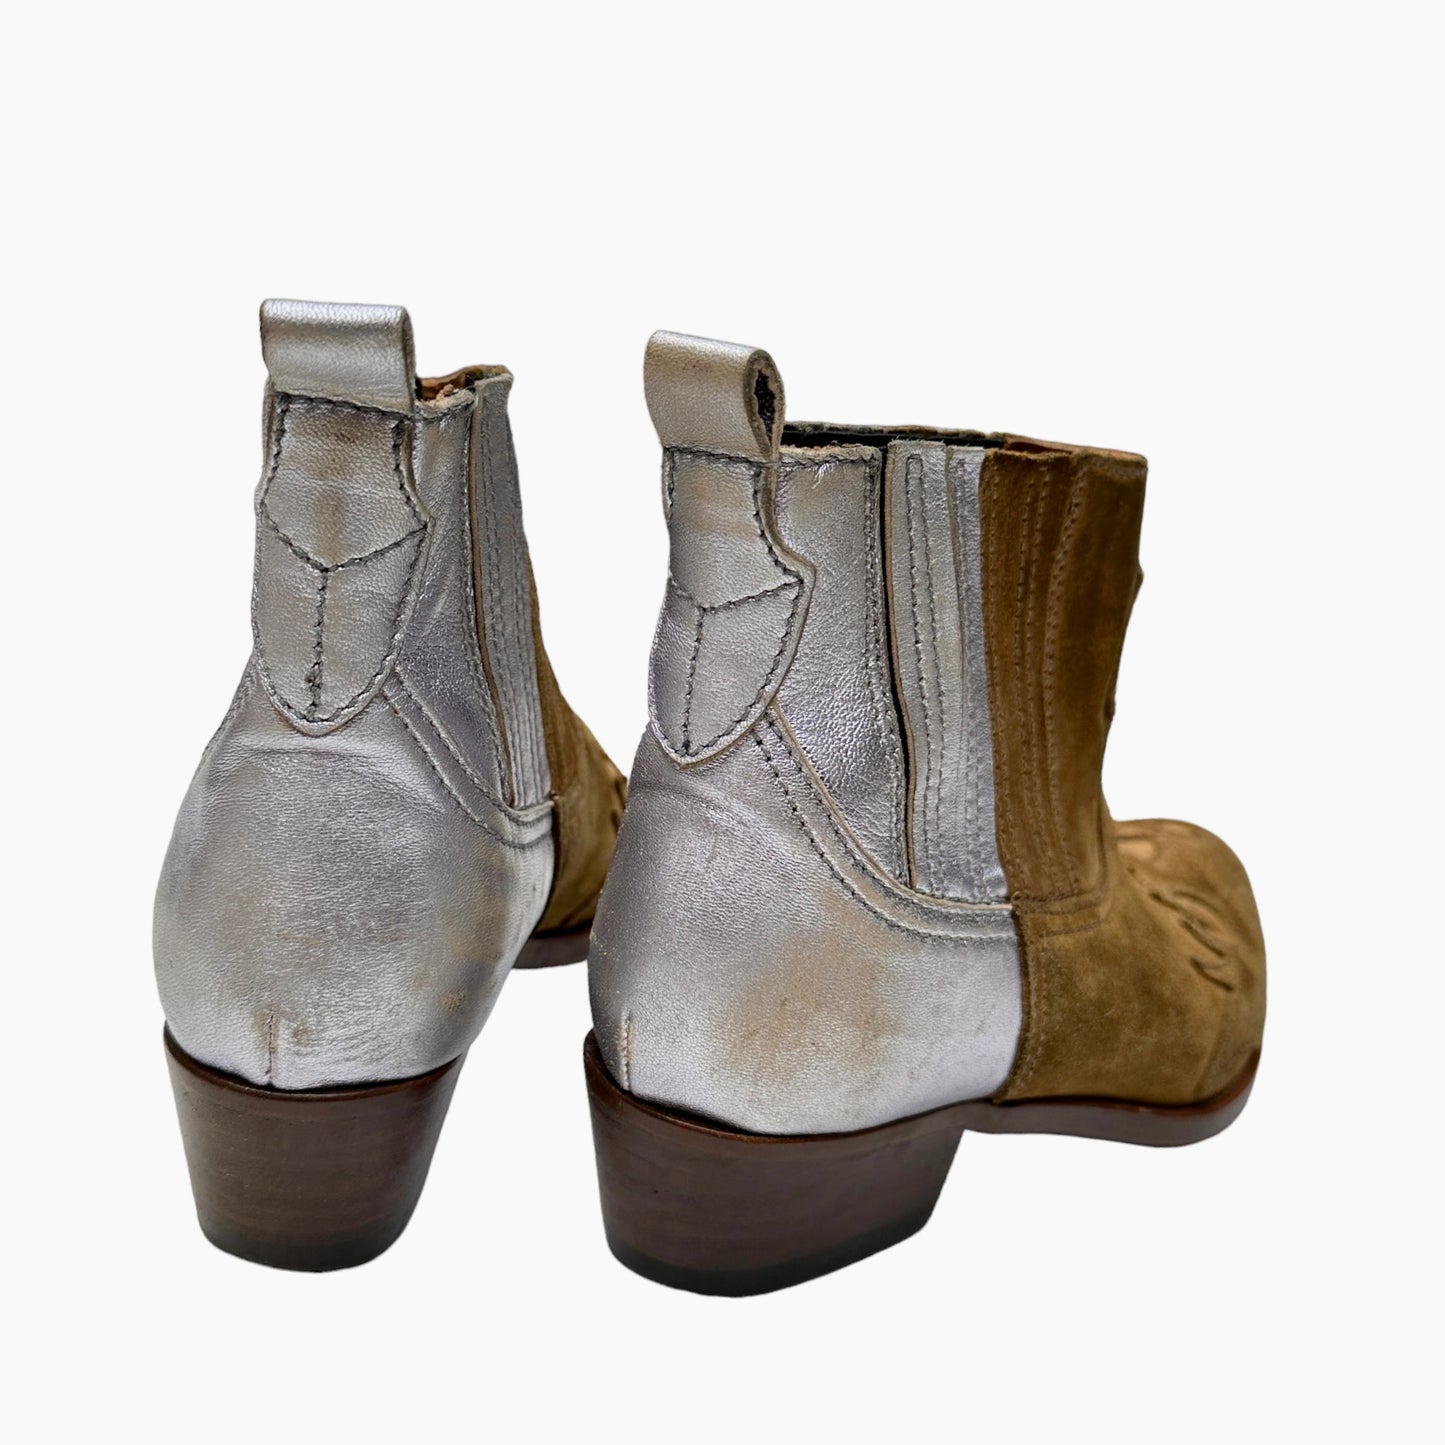 Brown Suede and Silver Leather Boots - 7